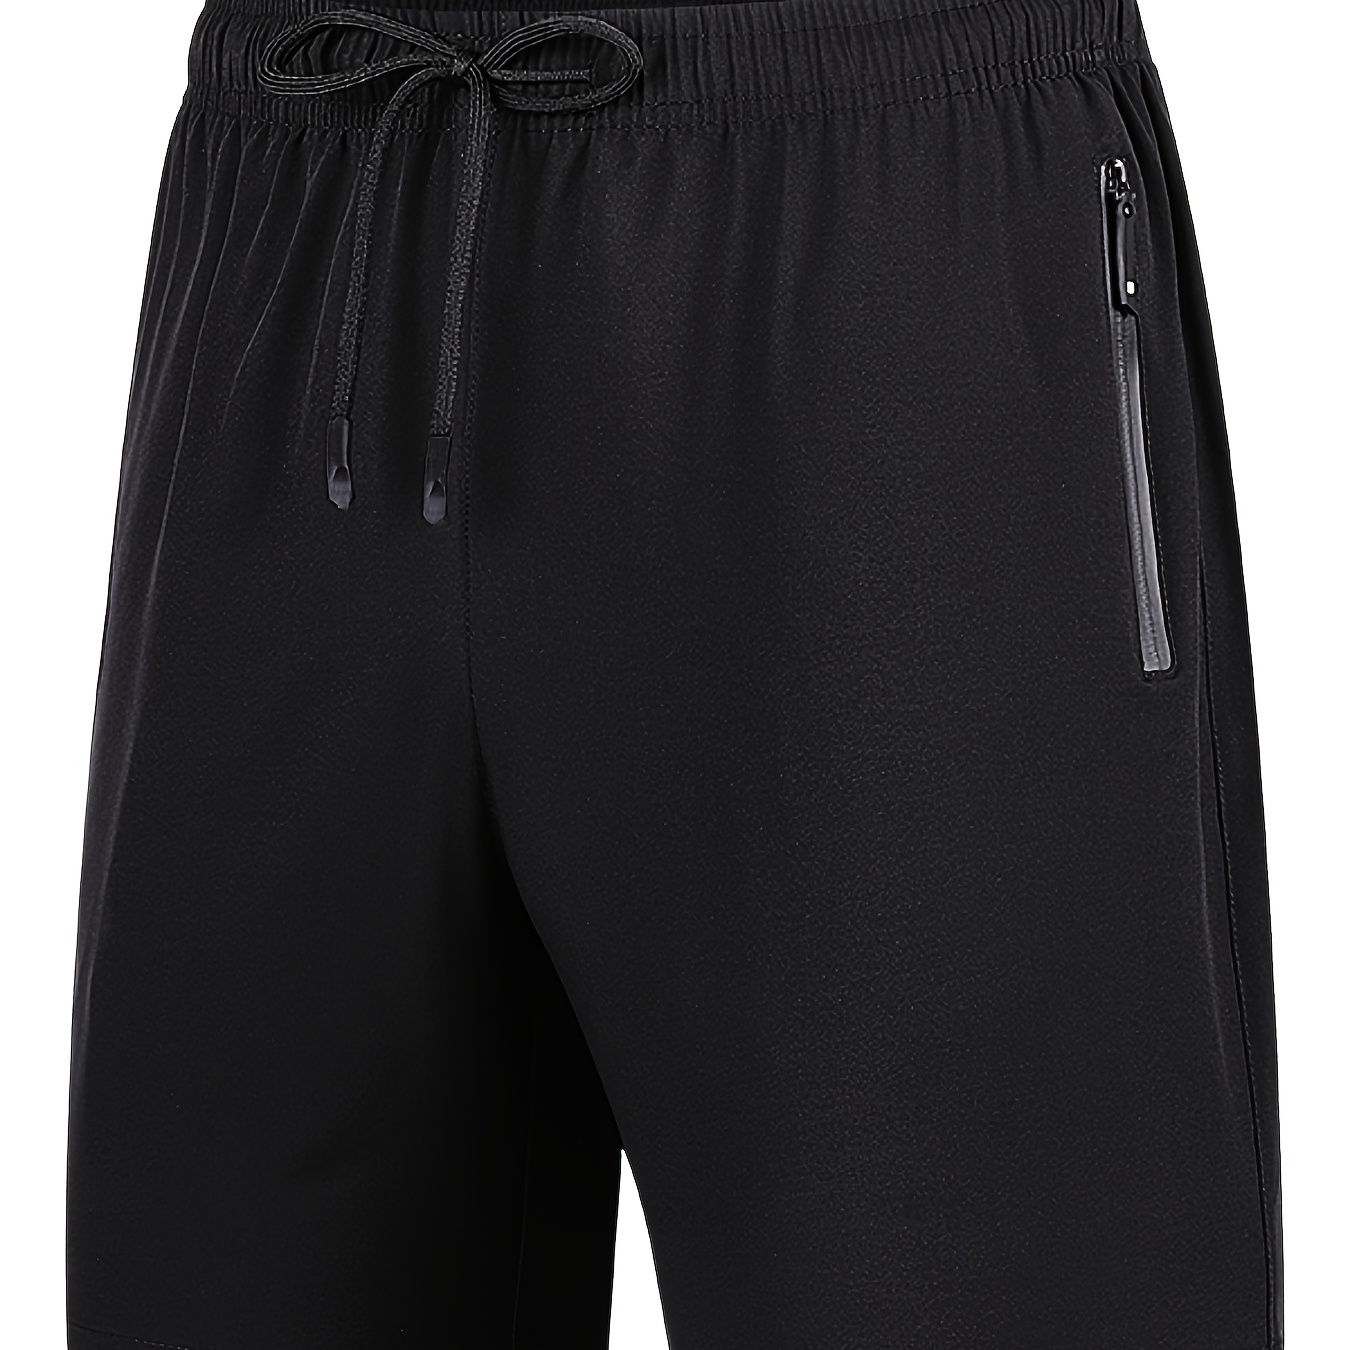 Quick Dry Men's Sport Shorts With Zipper Pocket - Moisture Wicking, Breathable, And Stretchy For Cycling, Fitness, Gym, And Outdoor Activities